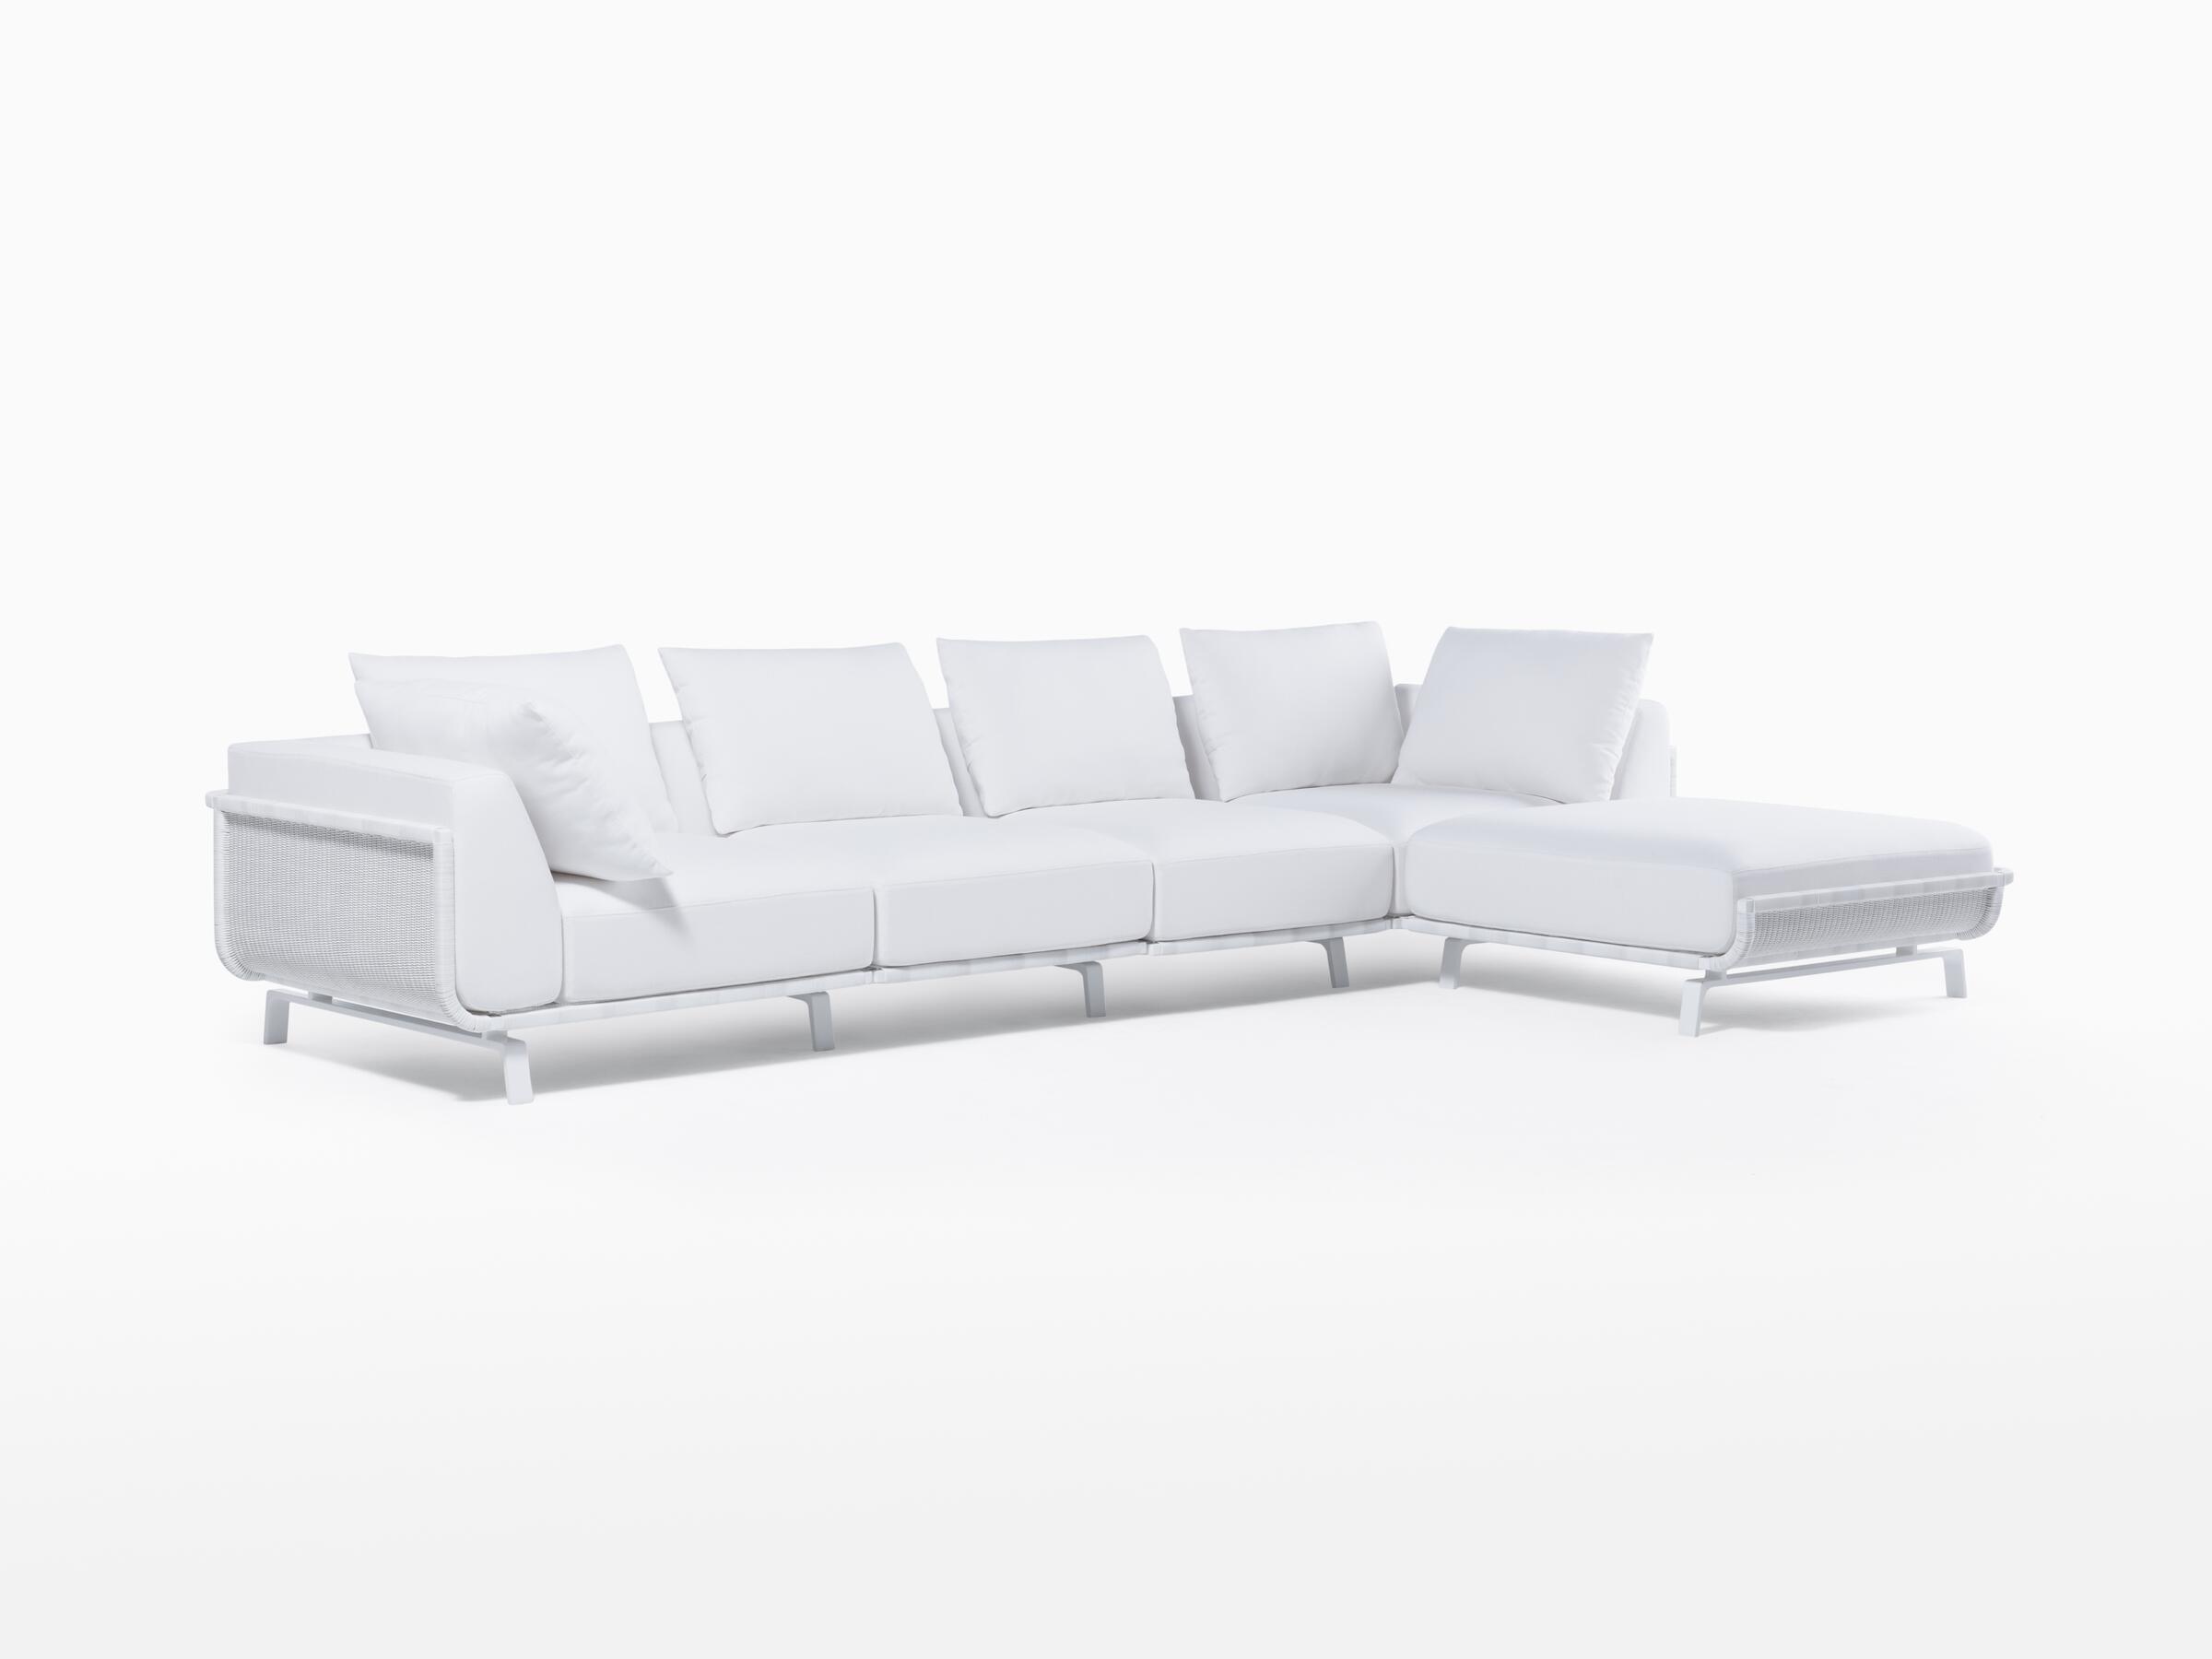 Tortuga Sectional | HOLLY HUNT